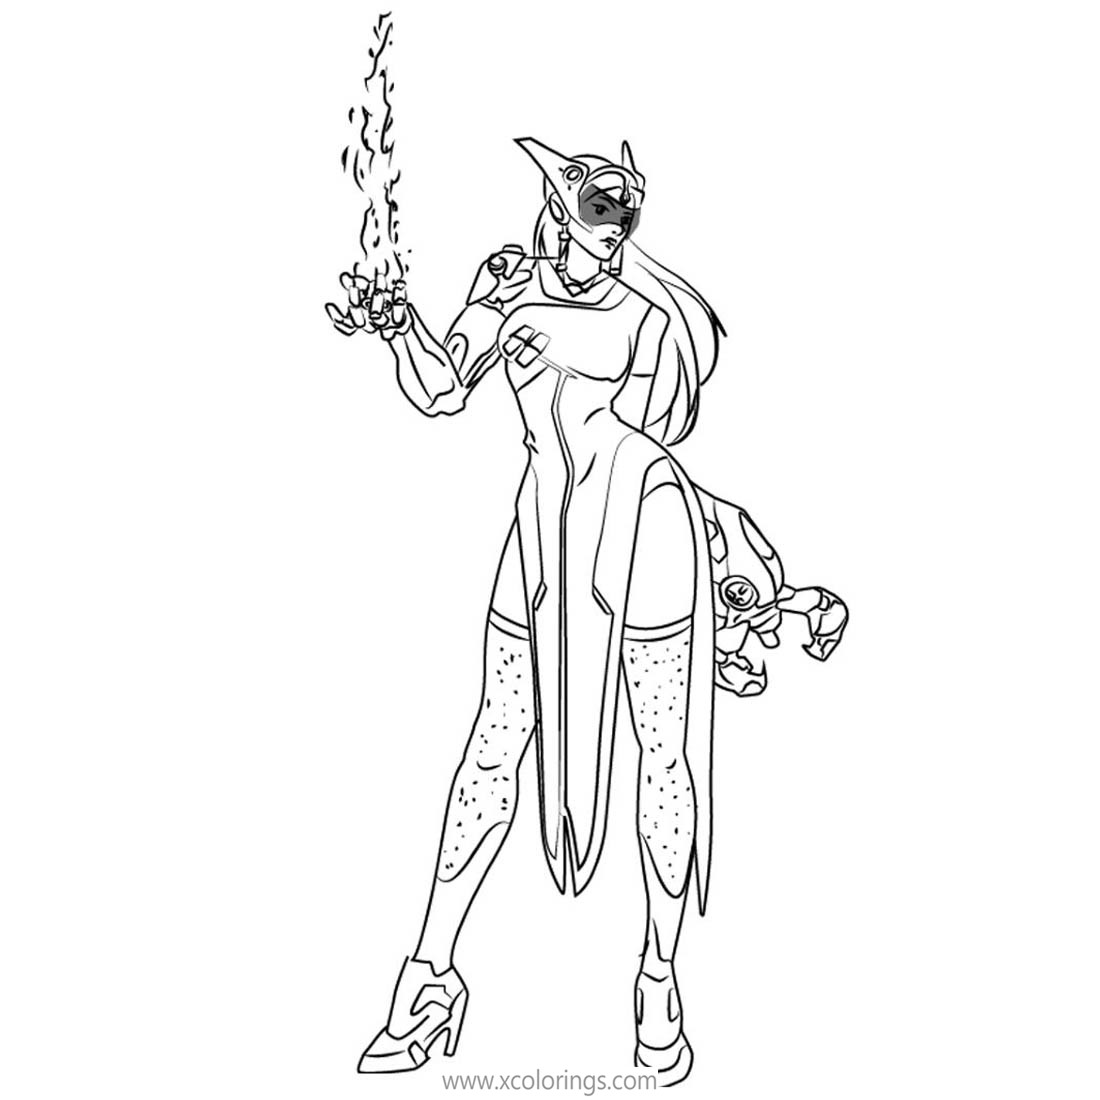 Free Overwatch Symmetra Coloring Pages printable